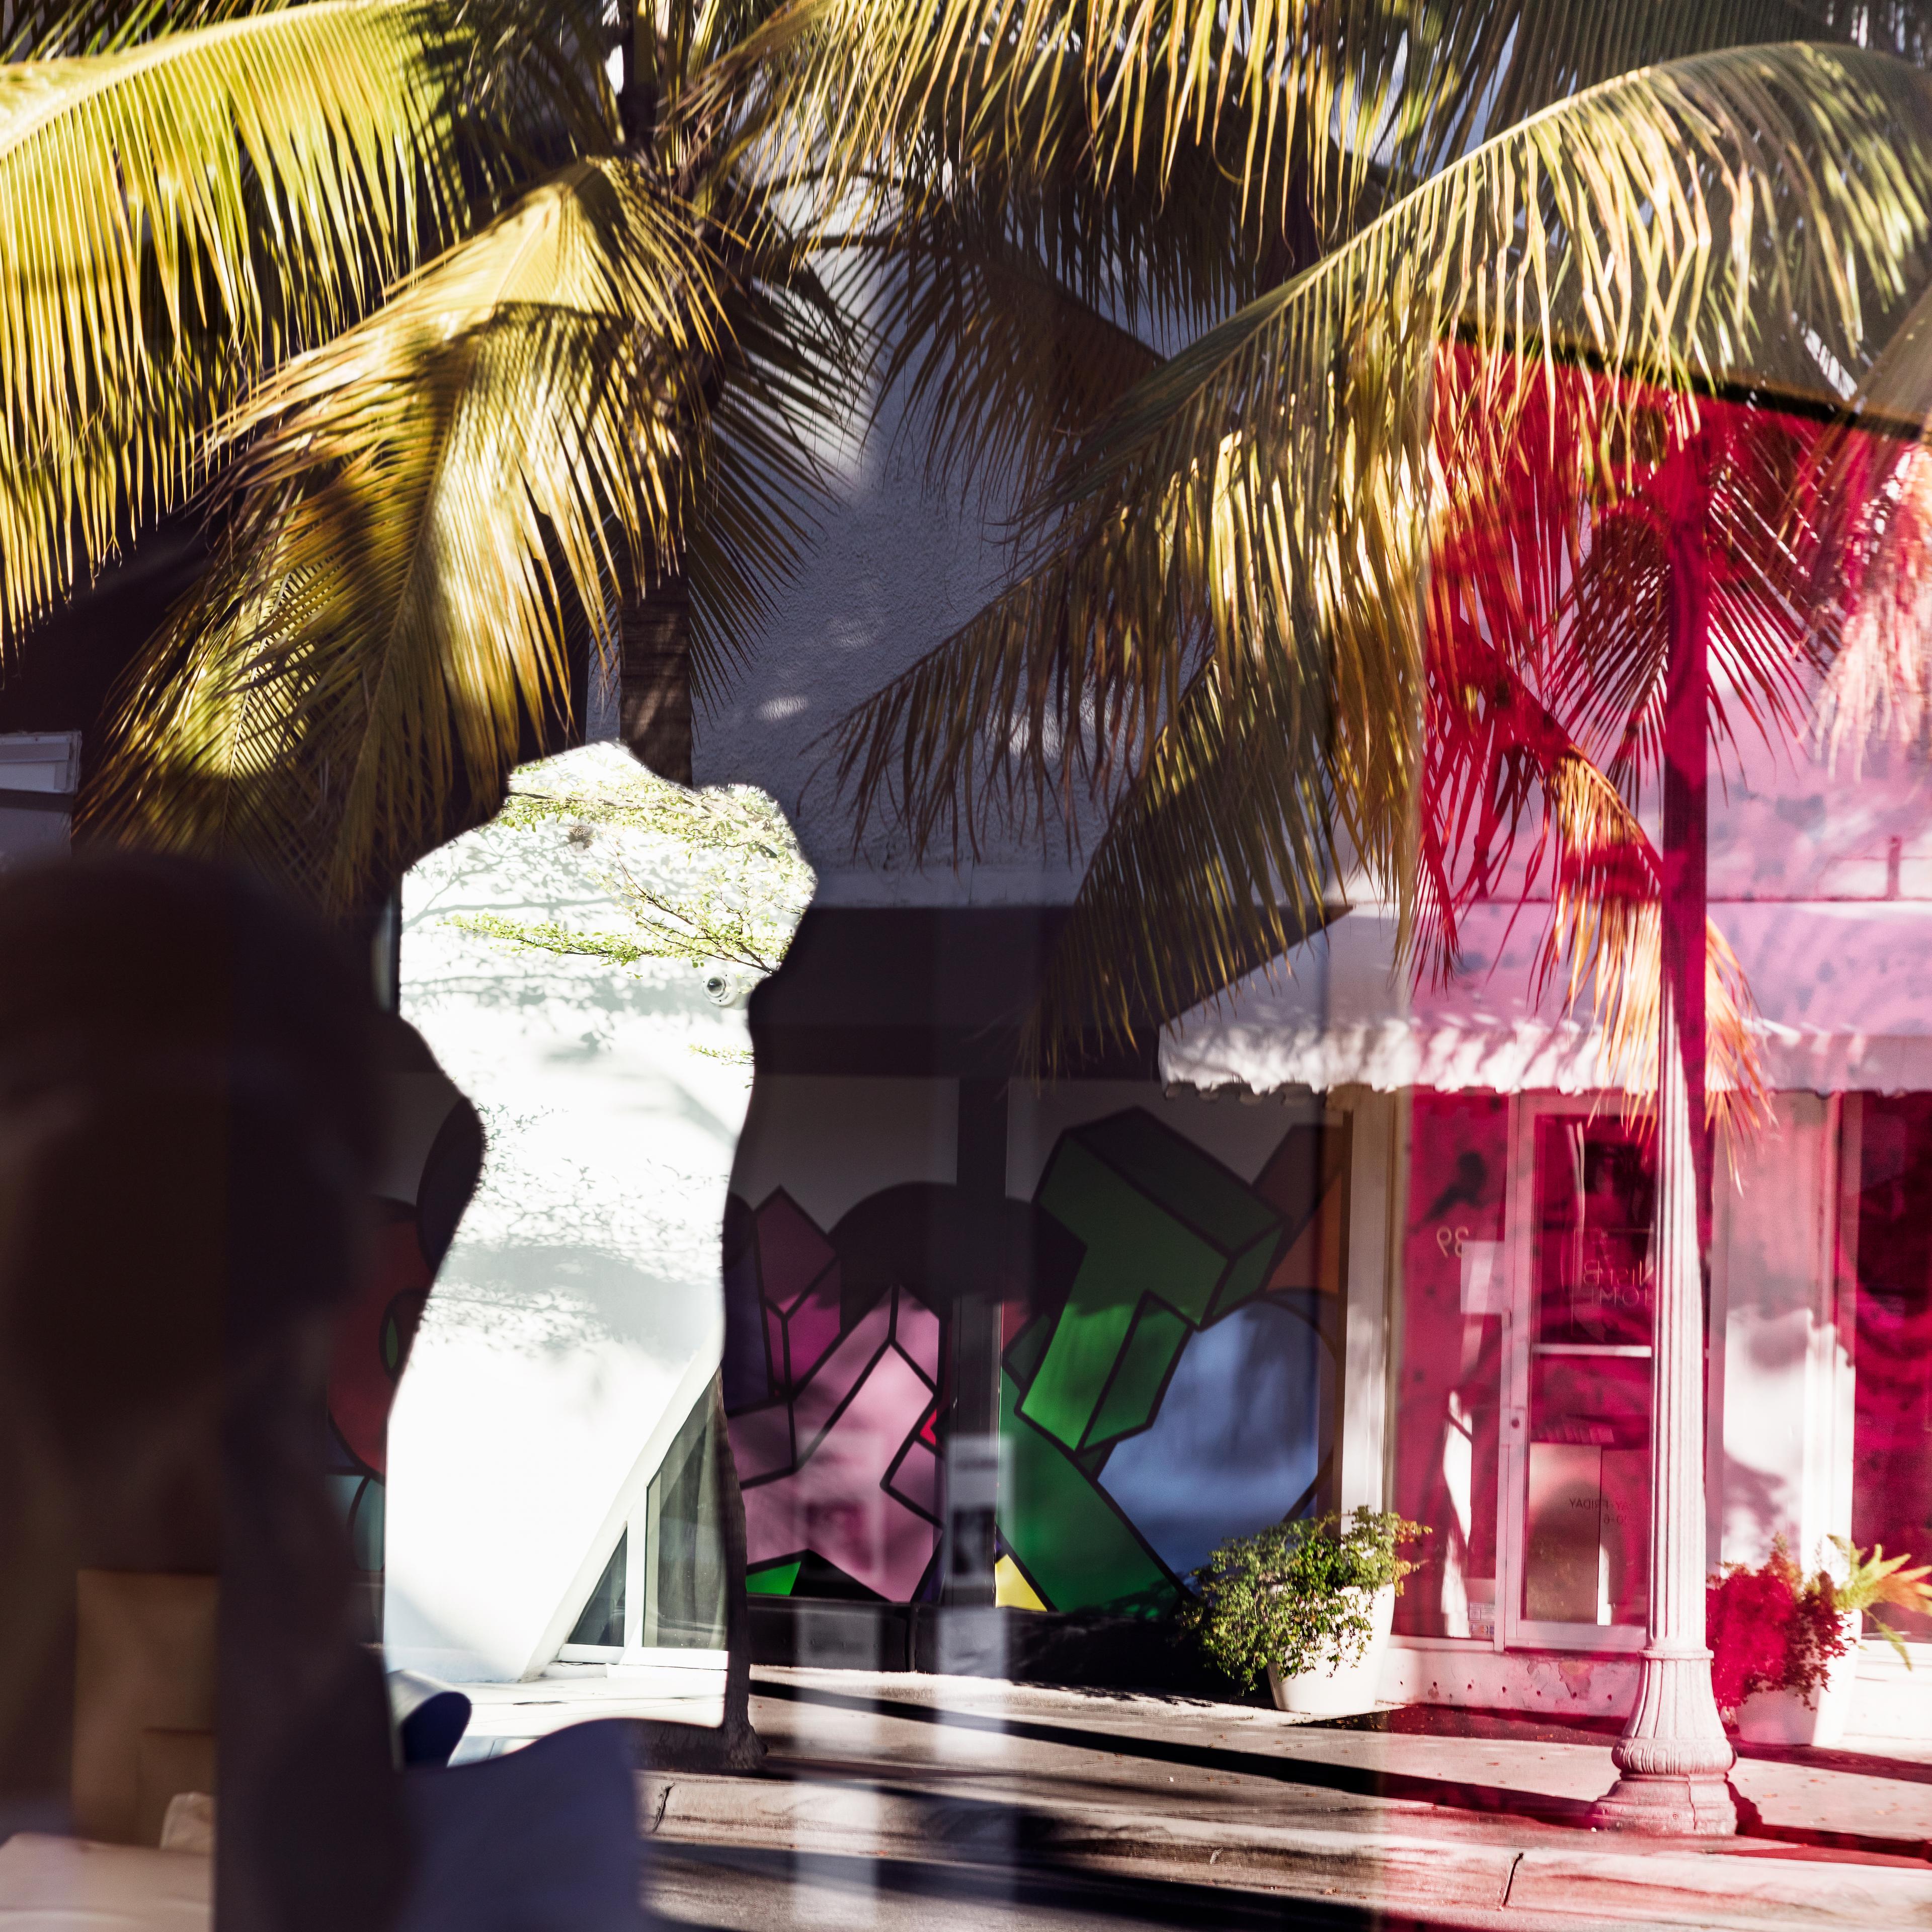 Collage image, of two store fronts on the right side of the image, on the right there is a silhouette shaped crop, along with palm trees overshadowing the back.  